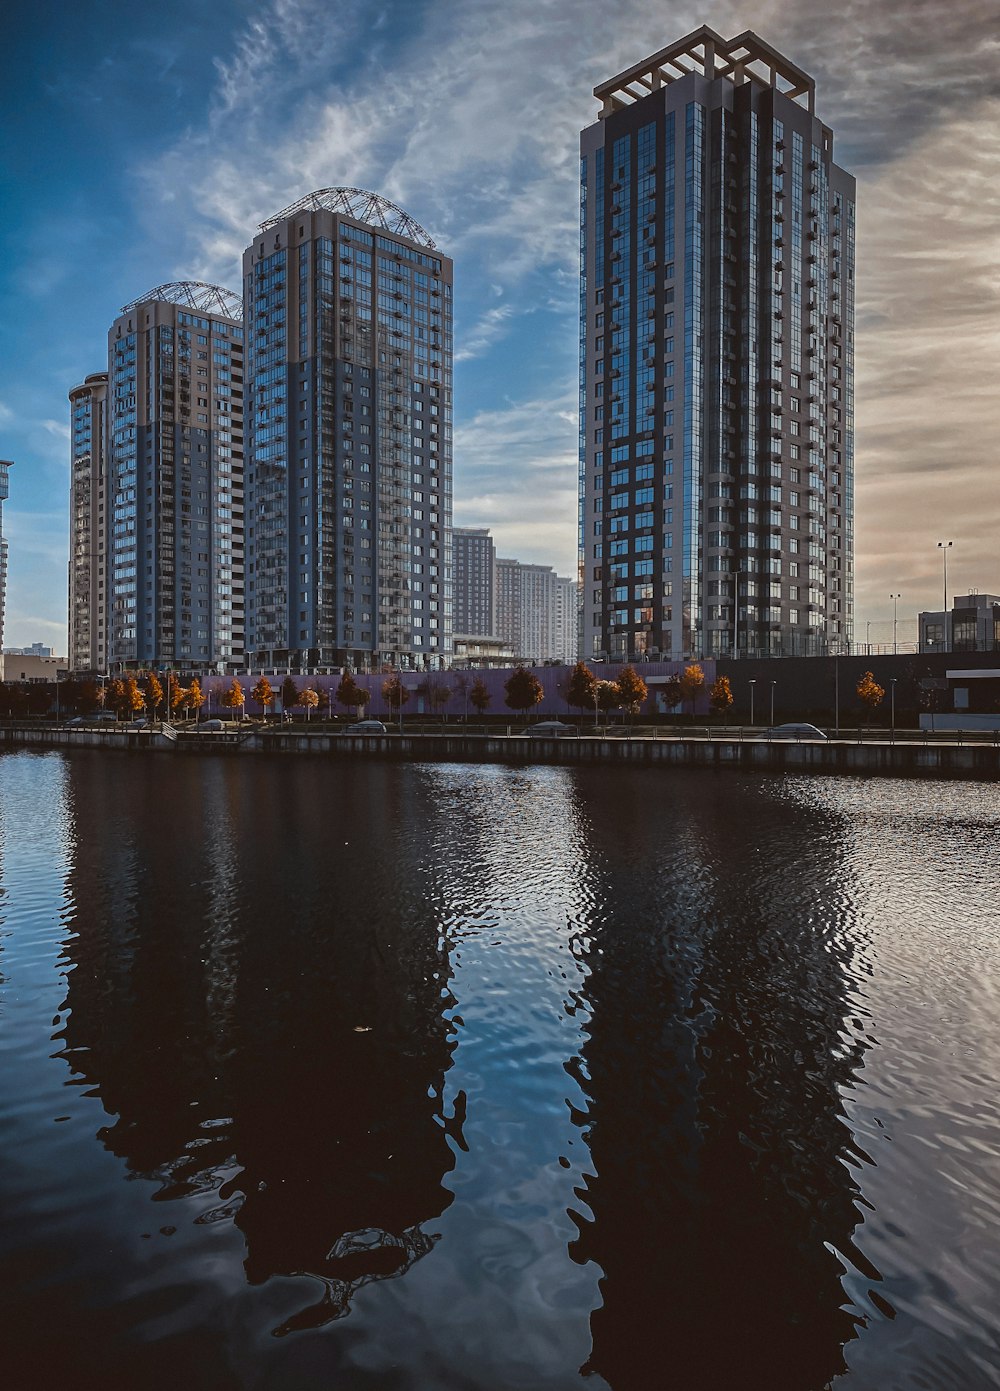 a group of tall buildings by a body of water